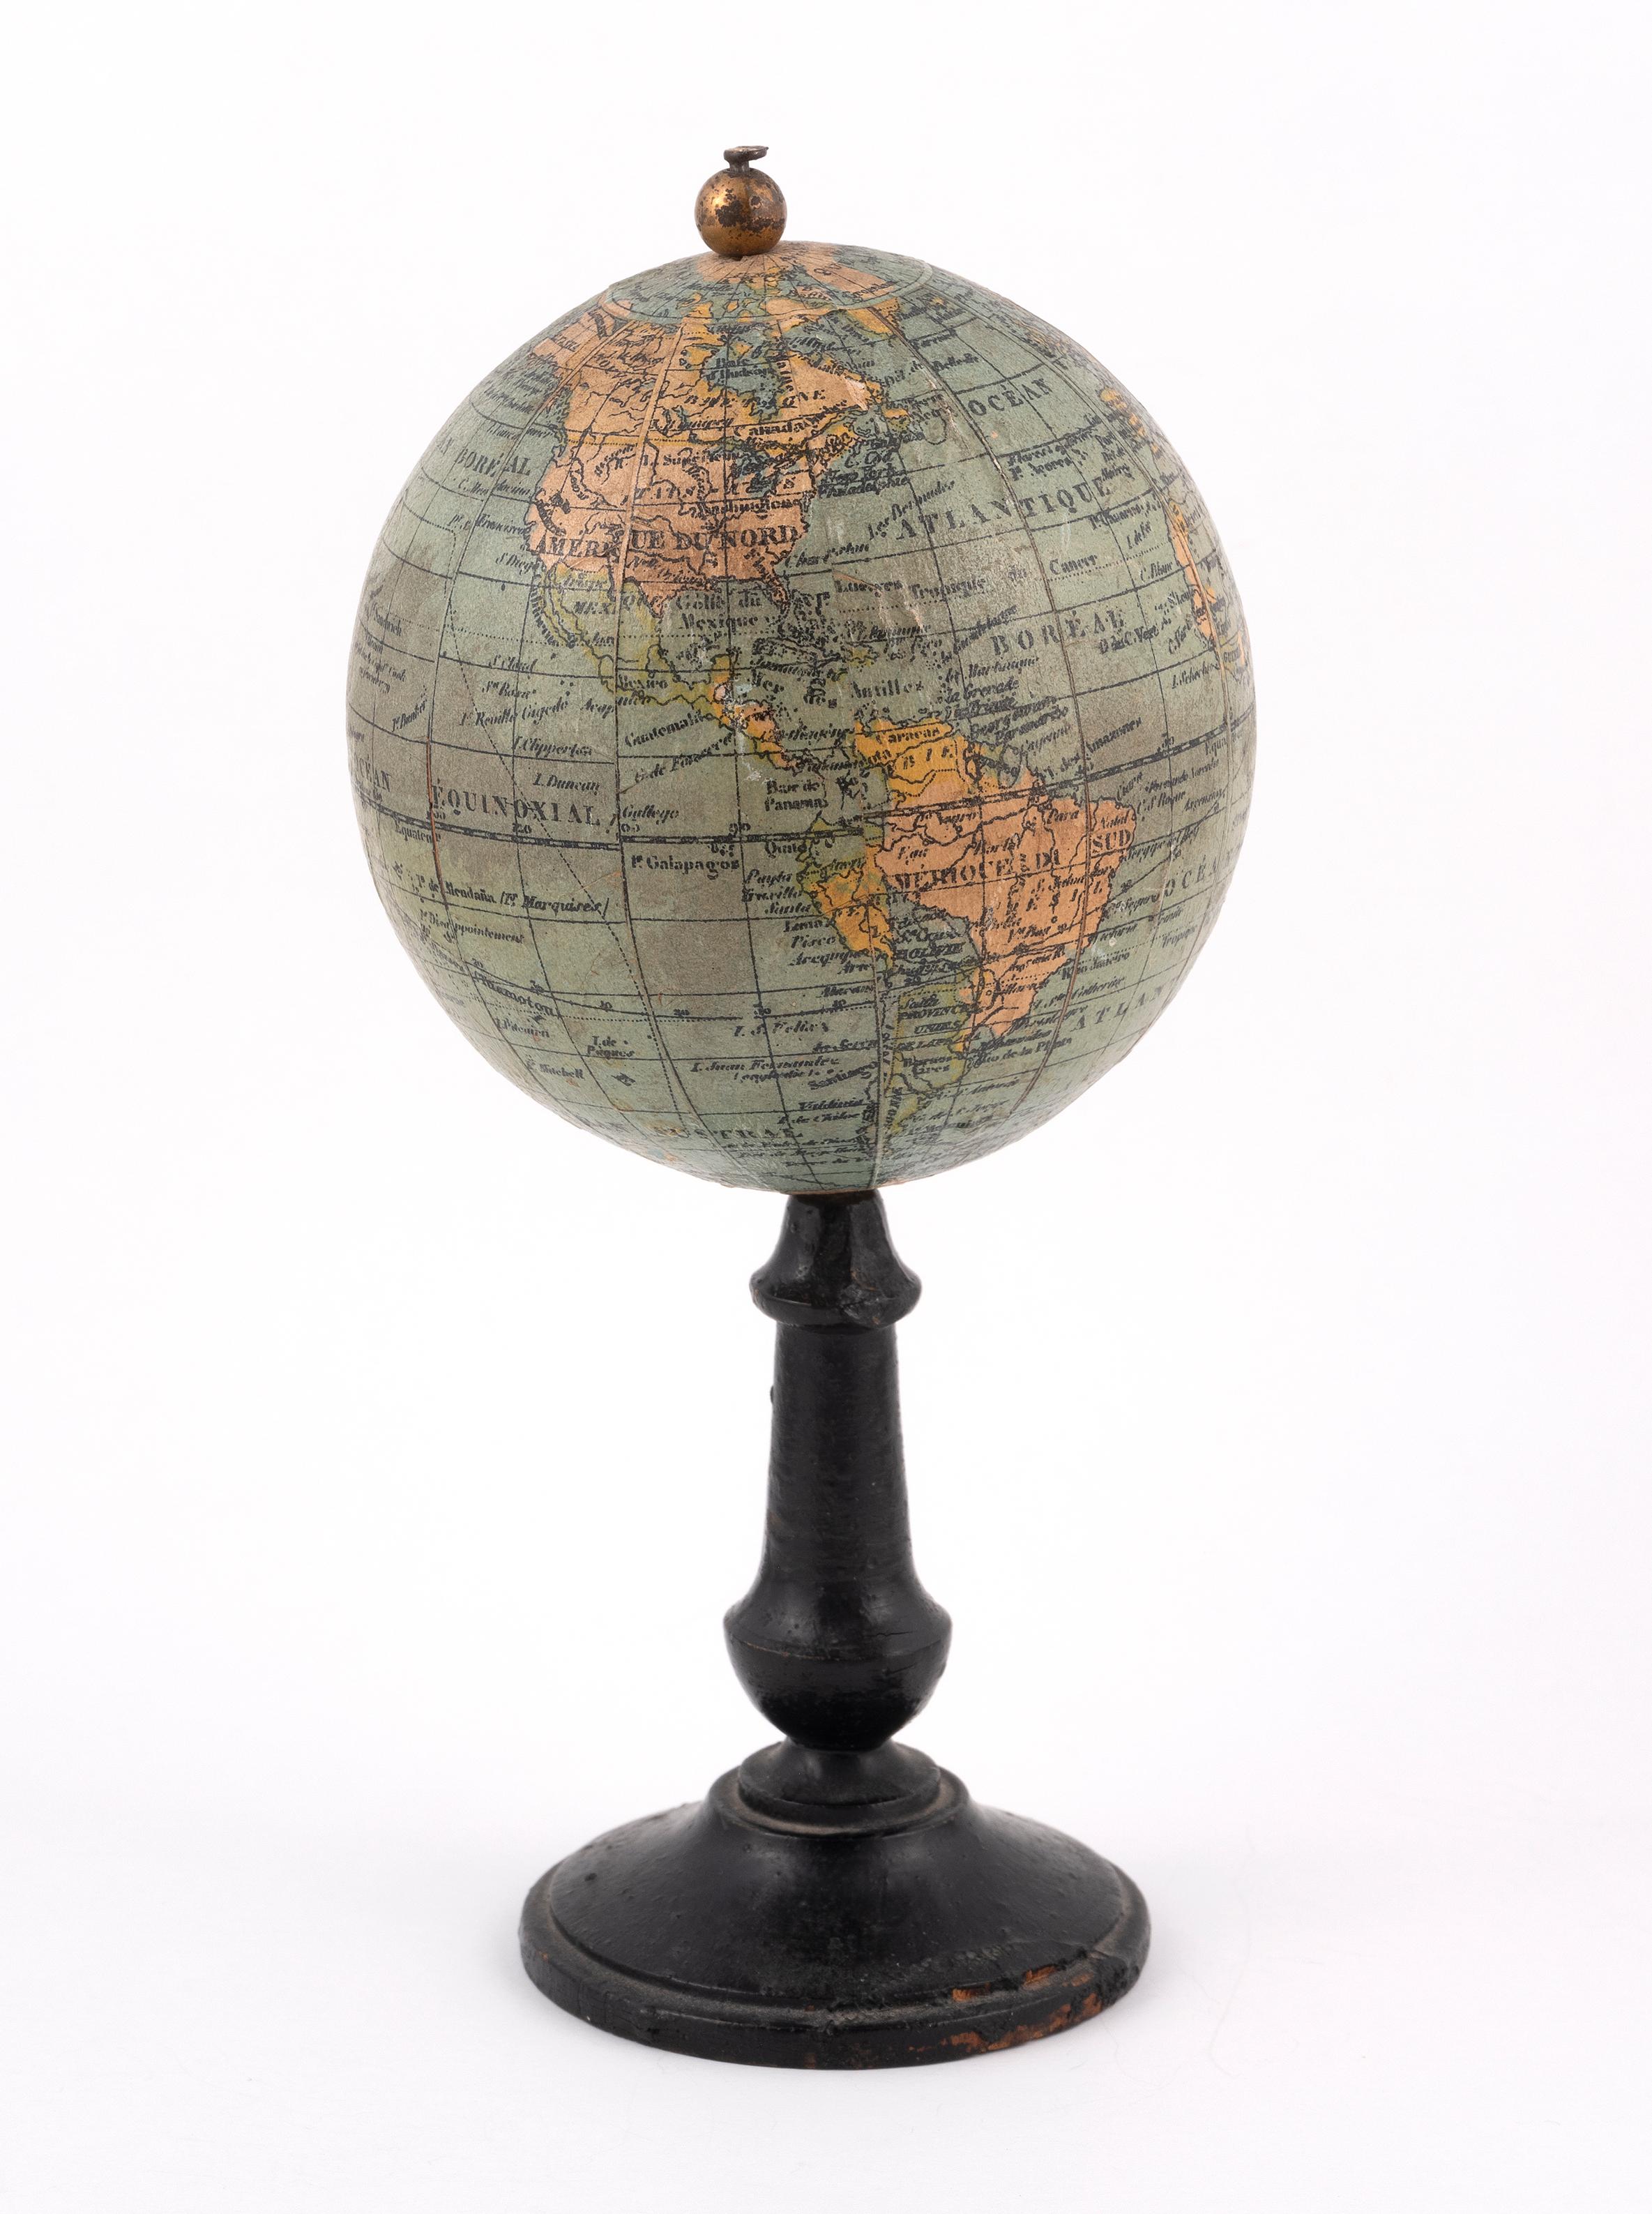 SHIPPING POLICY:
No additional costs will be added to this order.
Shipping costs will be totally covered by the seller (customs duties included). 

An early 20th-Century 3-inch diameter French terrestrial desk globe,
by Thomas